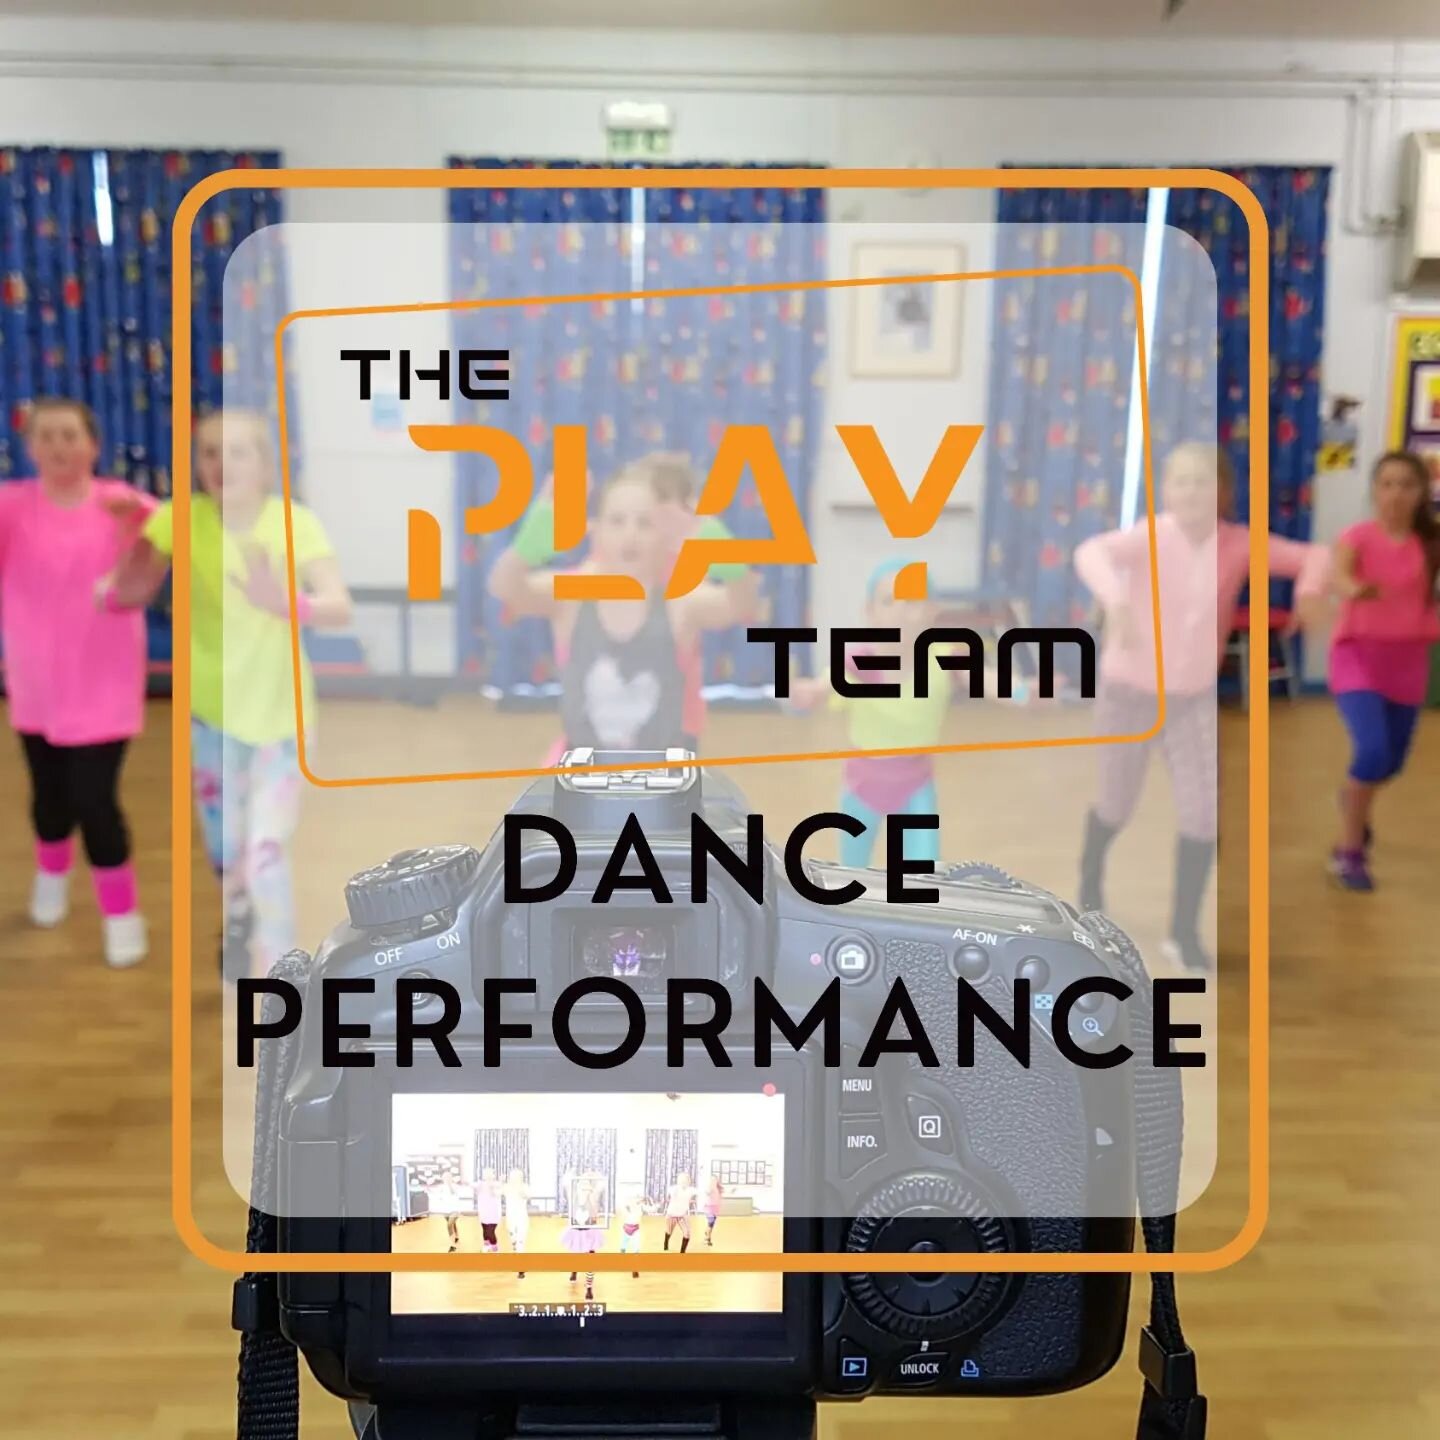 We would like to remind all Street dance parents that, on the final week of this course (Monday 6th February 2023), there will be a short dance performance; allowing the children to show the routine they have been working on. This was a real highligh